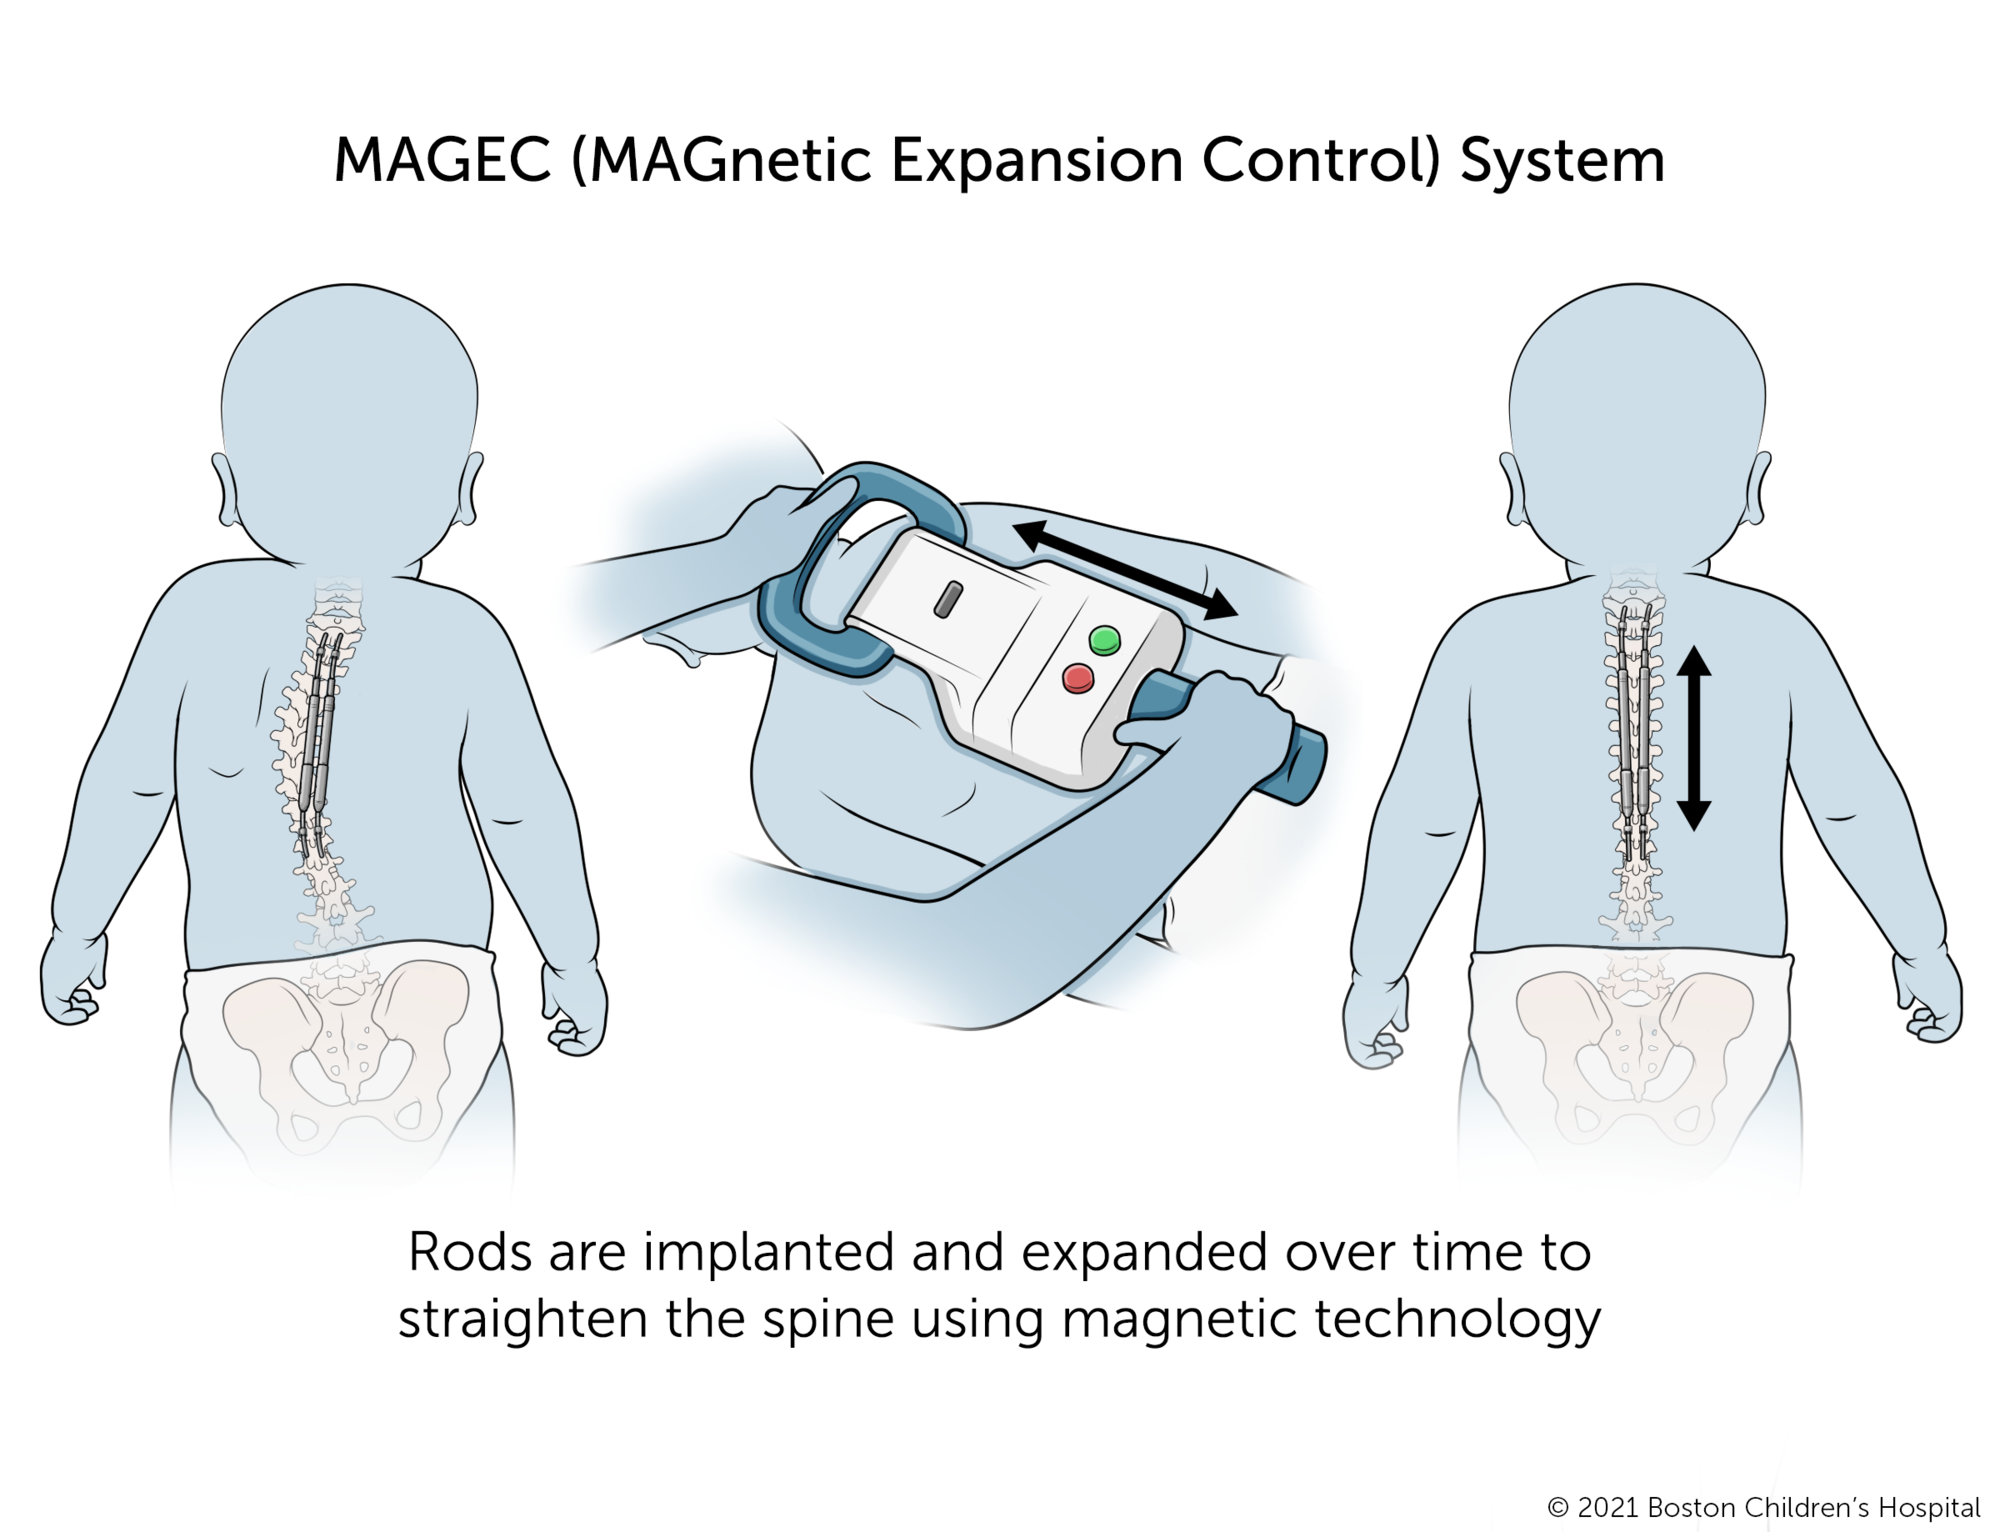 The MAGEC (Magnetic Expansion Control System). Implanted rods are slowly expanded with magnetic technology to straighten the spine over time. 